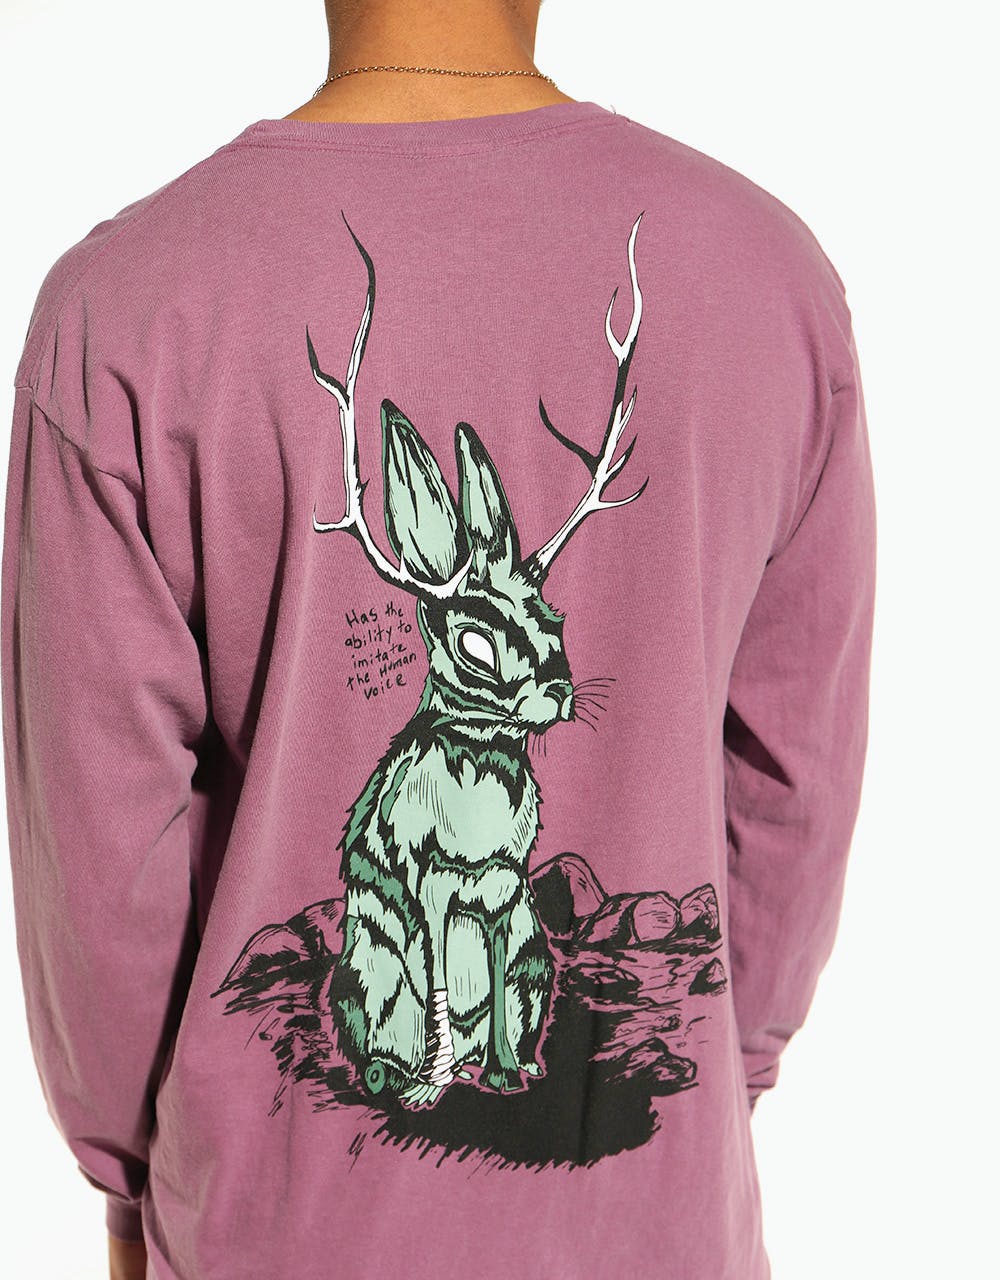 Welcome Jackalope Garment-Dyed L/S T-Shirt - Berry